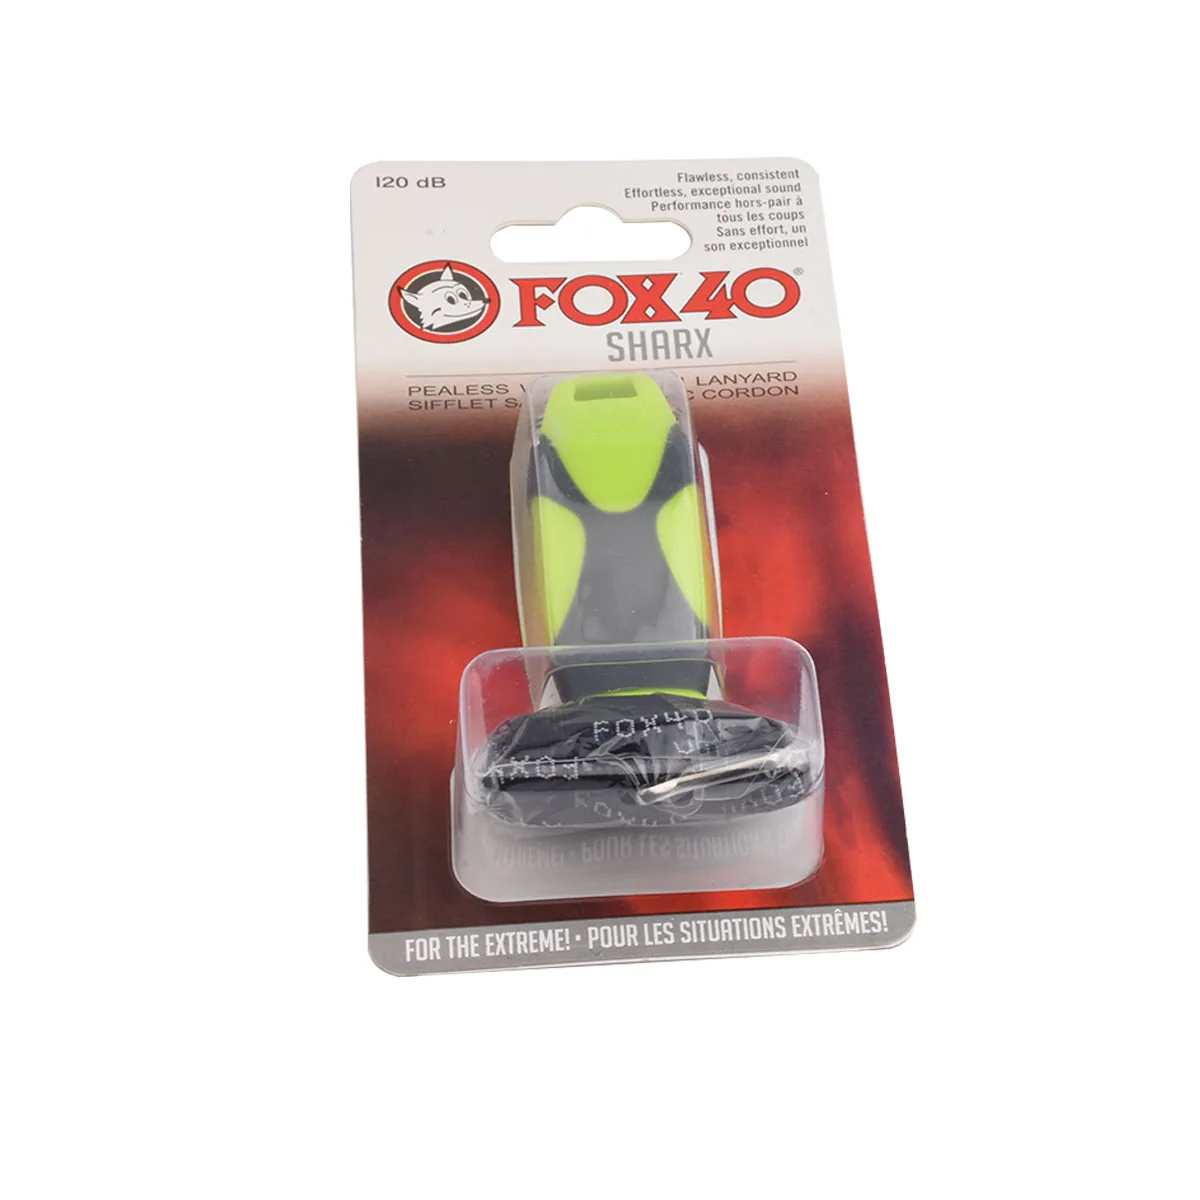 Fox 40 Sharx Whistle W/ Lanyard Referee Coach Survival Outdoor Yellow 3-Pack